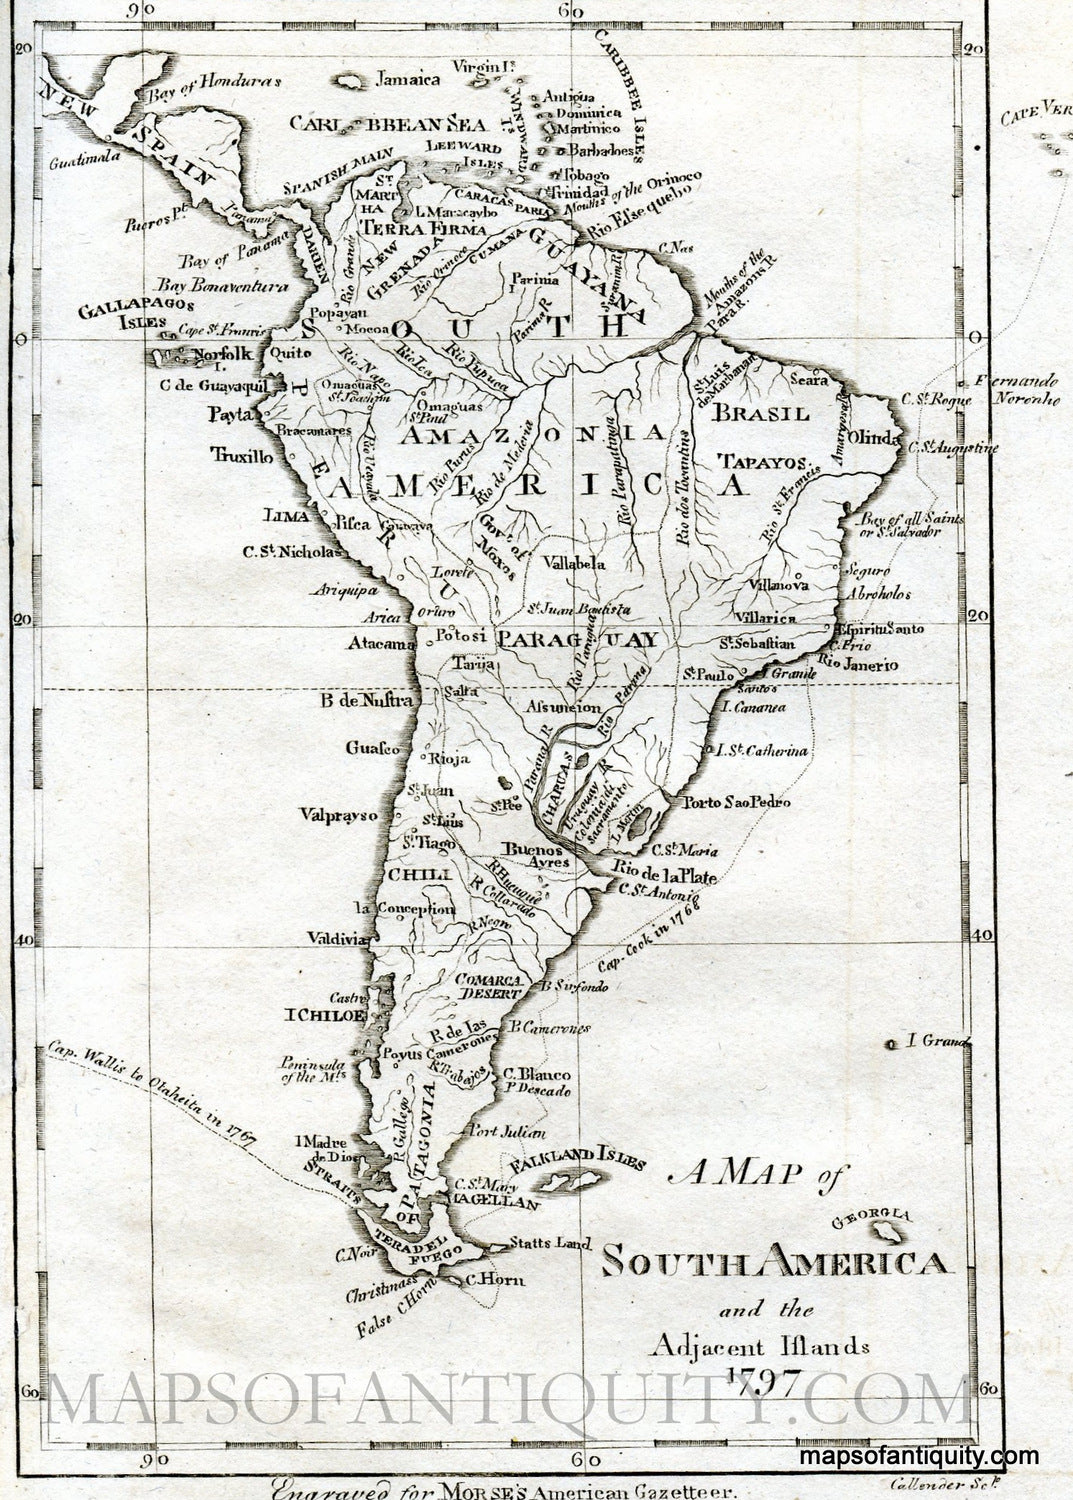 Black-and-white-antique-map-A-Map-of-South-America-and-the-Adjacent-Islands-1797-South-America-South-America-General-c.-1797-Morse-Maps-Of-Antiquity